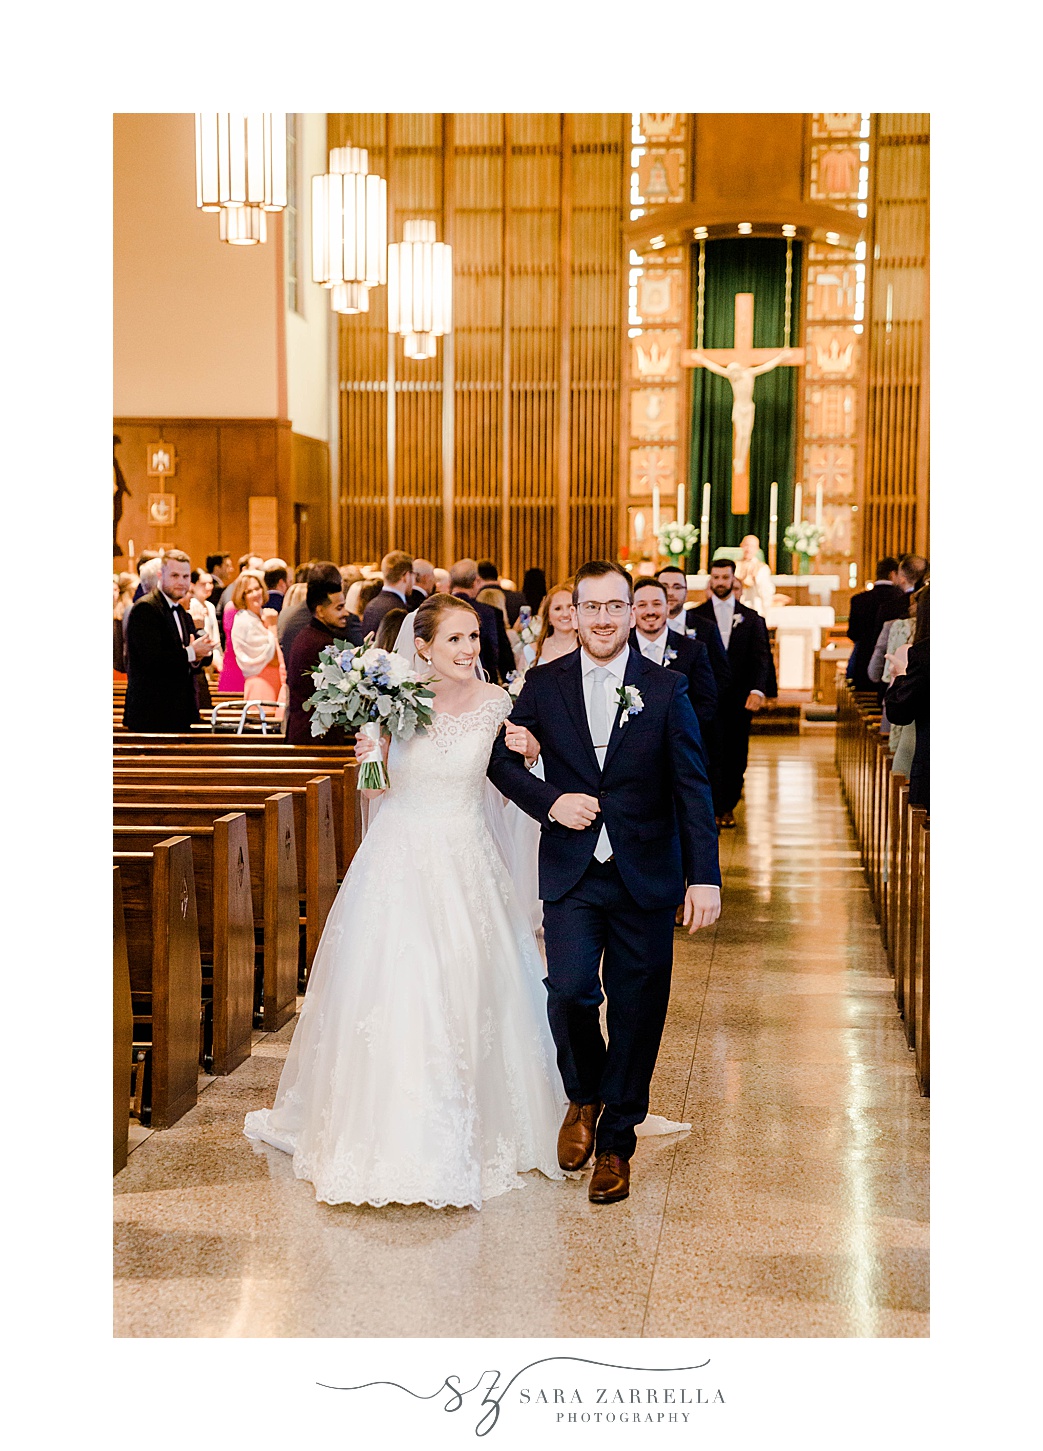 newlyweds walk up aisle after traditional wedding ceremony in Rhode Island